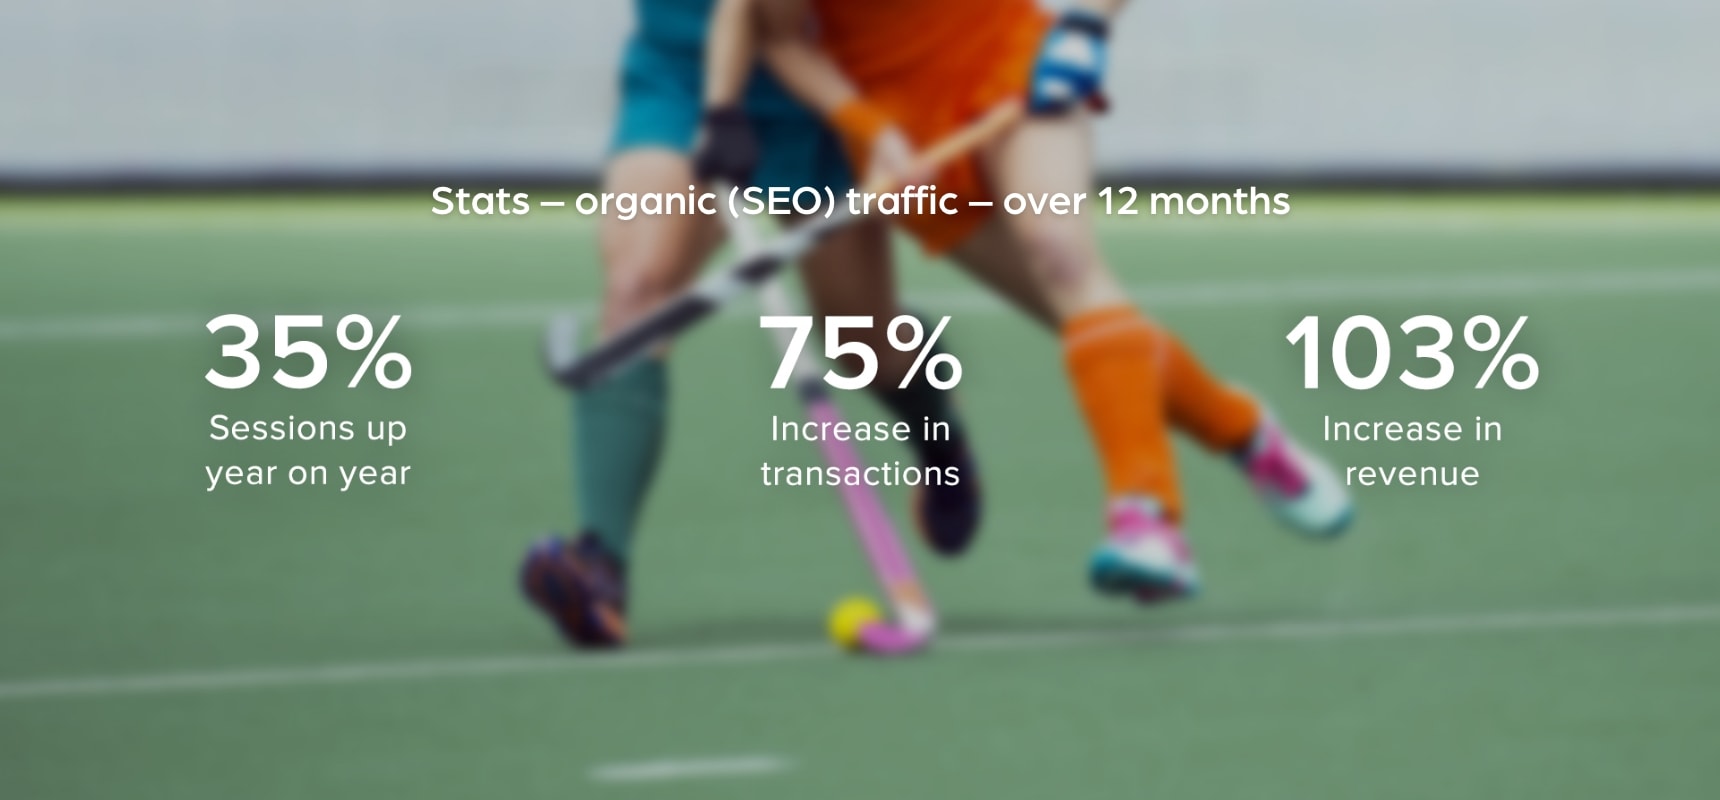 Stats – organic (SEO) traffic – over 12 months